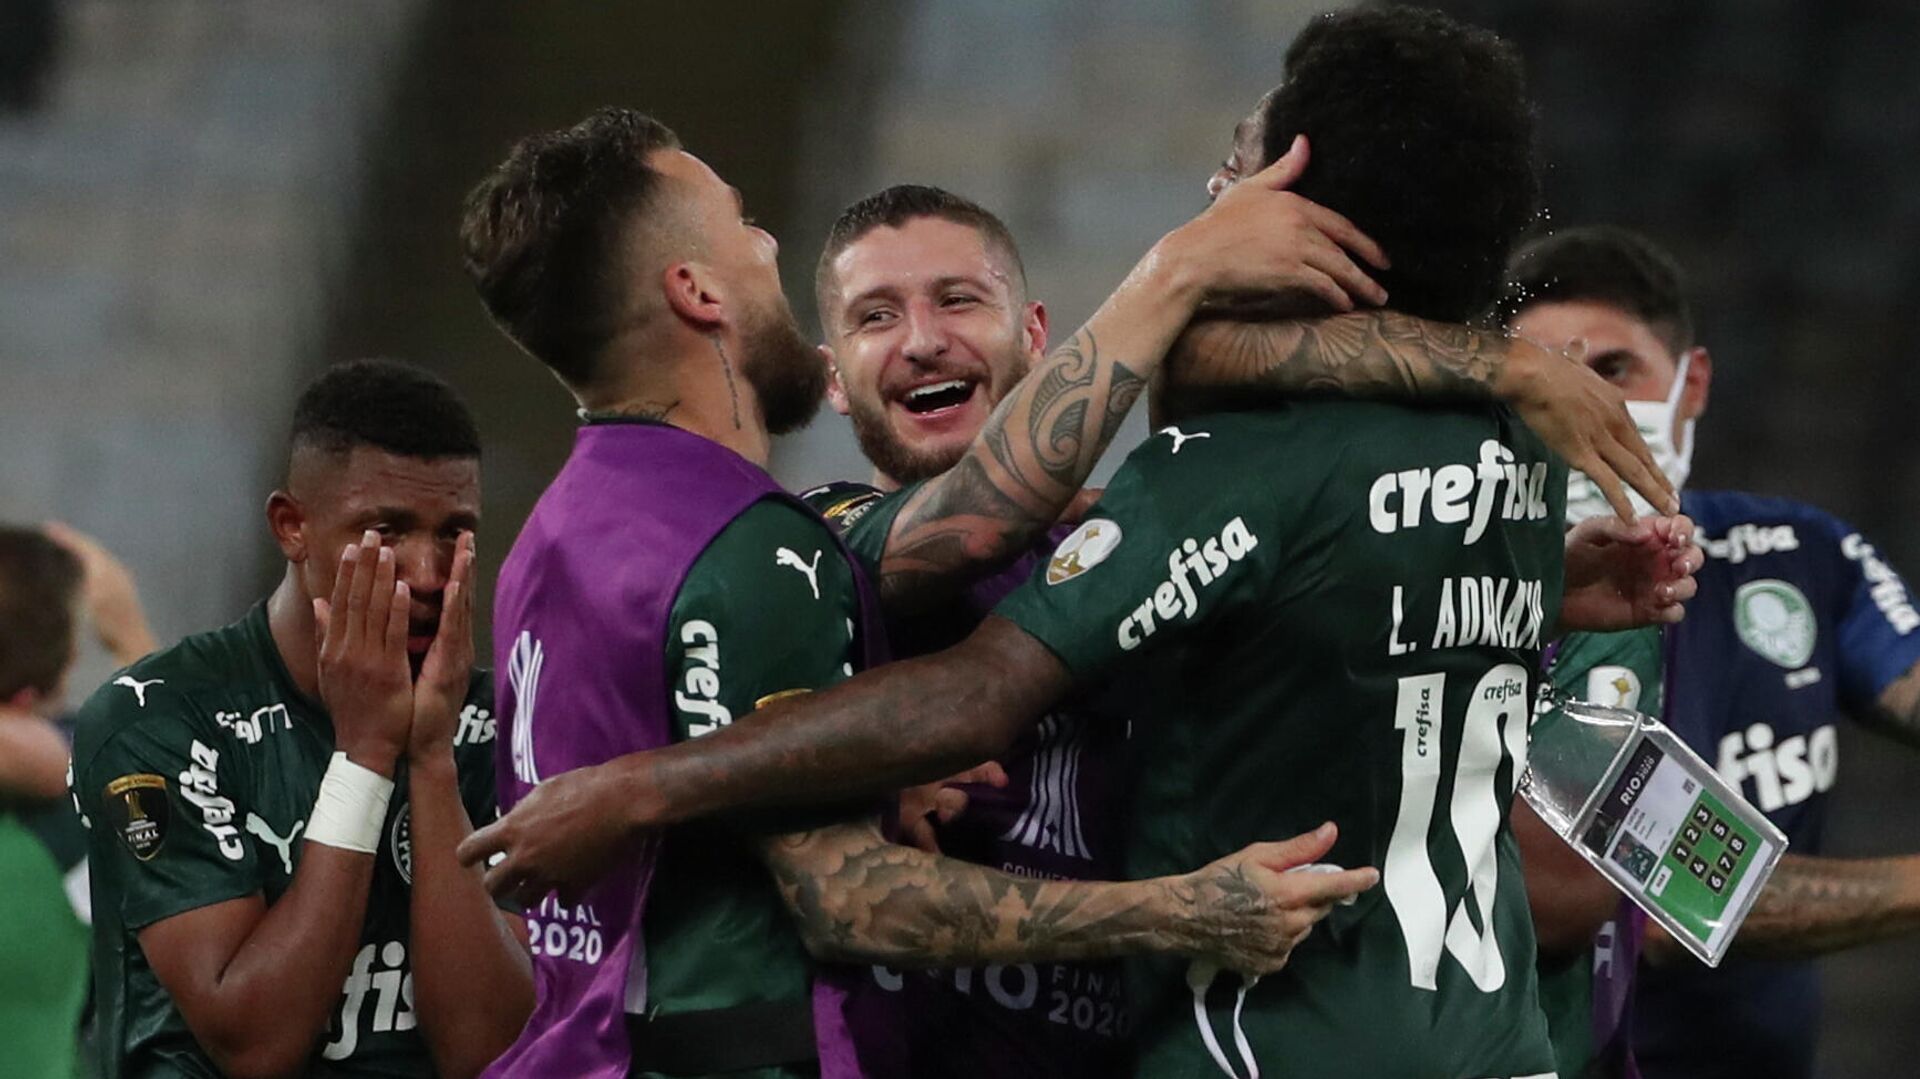 Players of Palmeiras celebrate after winning the Copa Libertadores football tournament by defeating Santos in the all-Brazilian final match at Maracana Stadium in Rio de Janeiro, Brazil, on January 30, 2021. (Photo by RICARDO MORAES / POOL / AFP) - РИА Новости, 1920, 31.01.2021